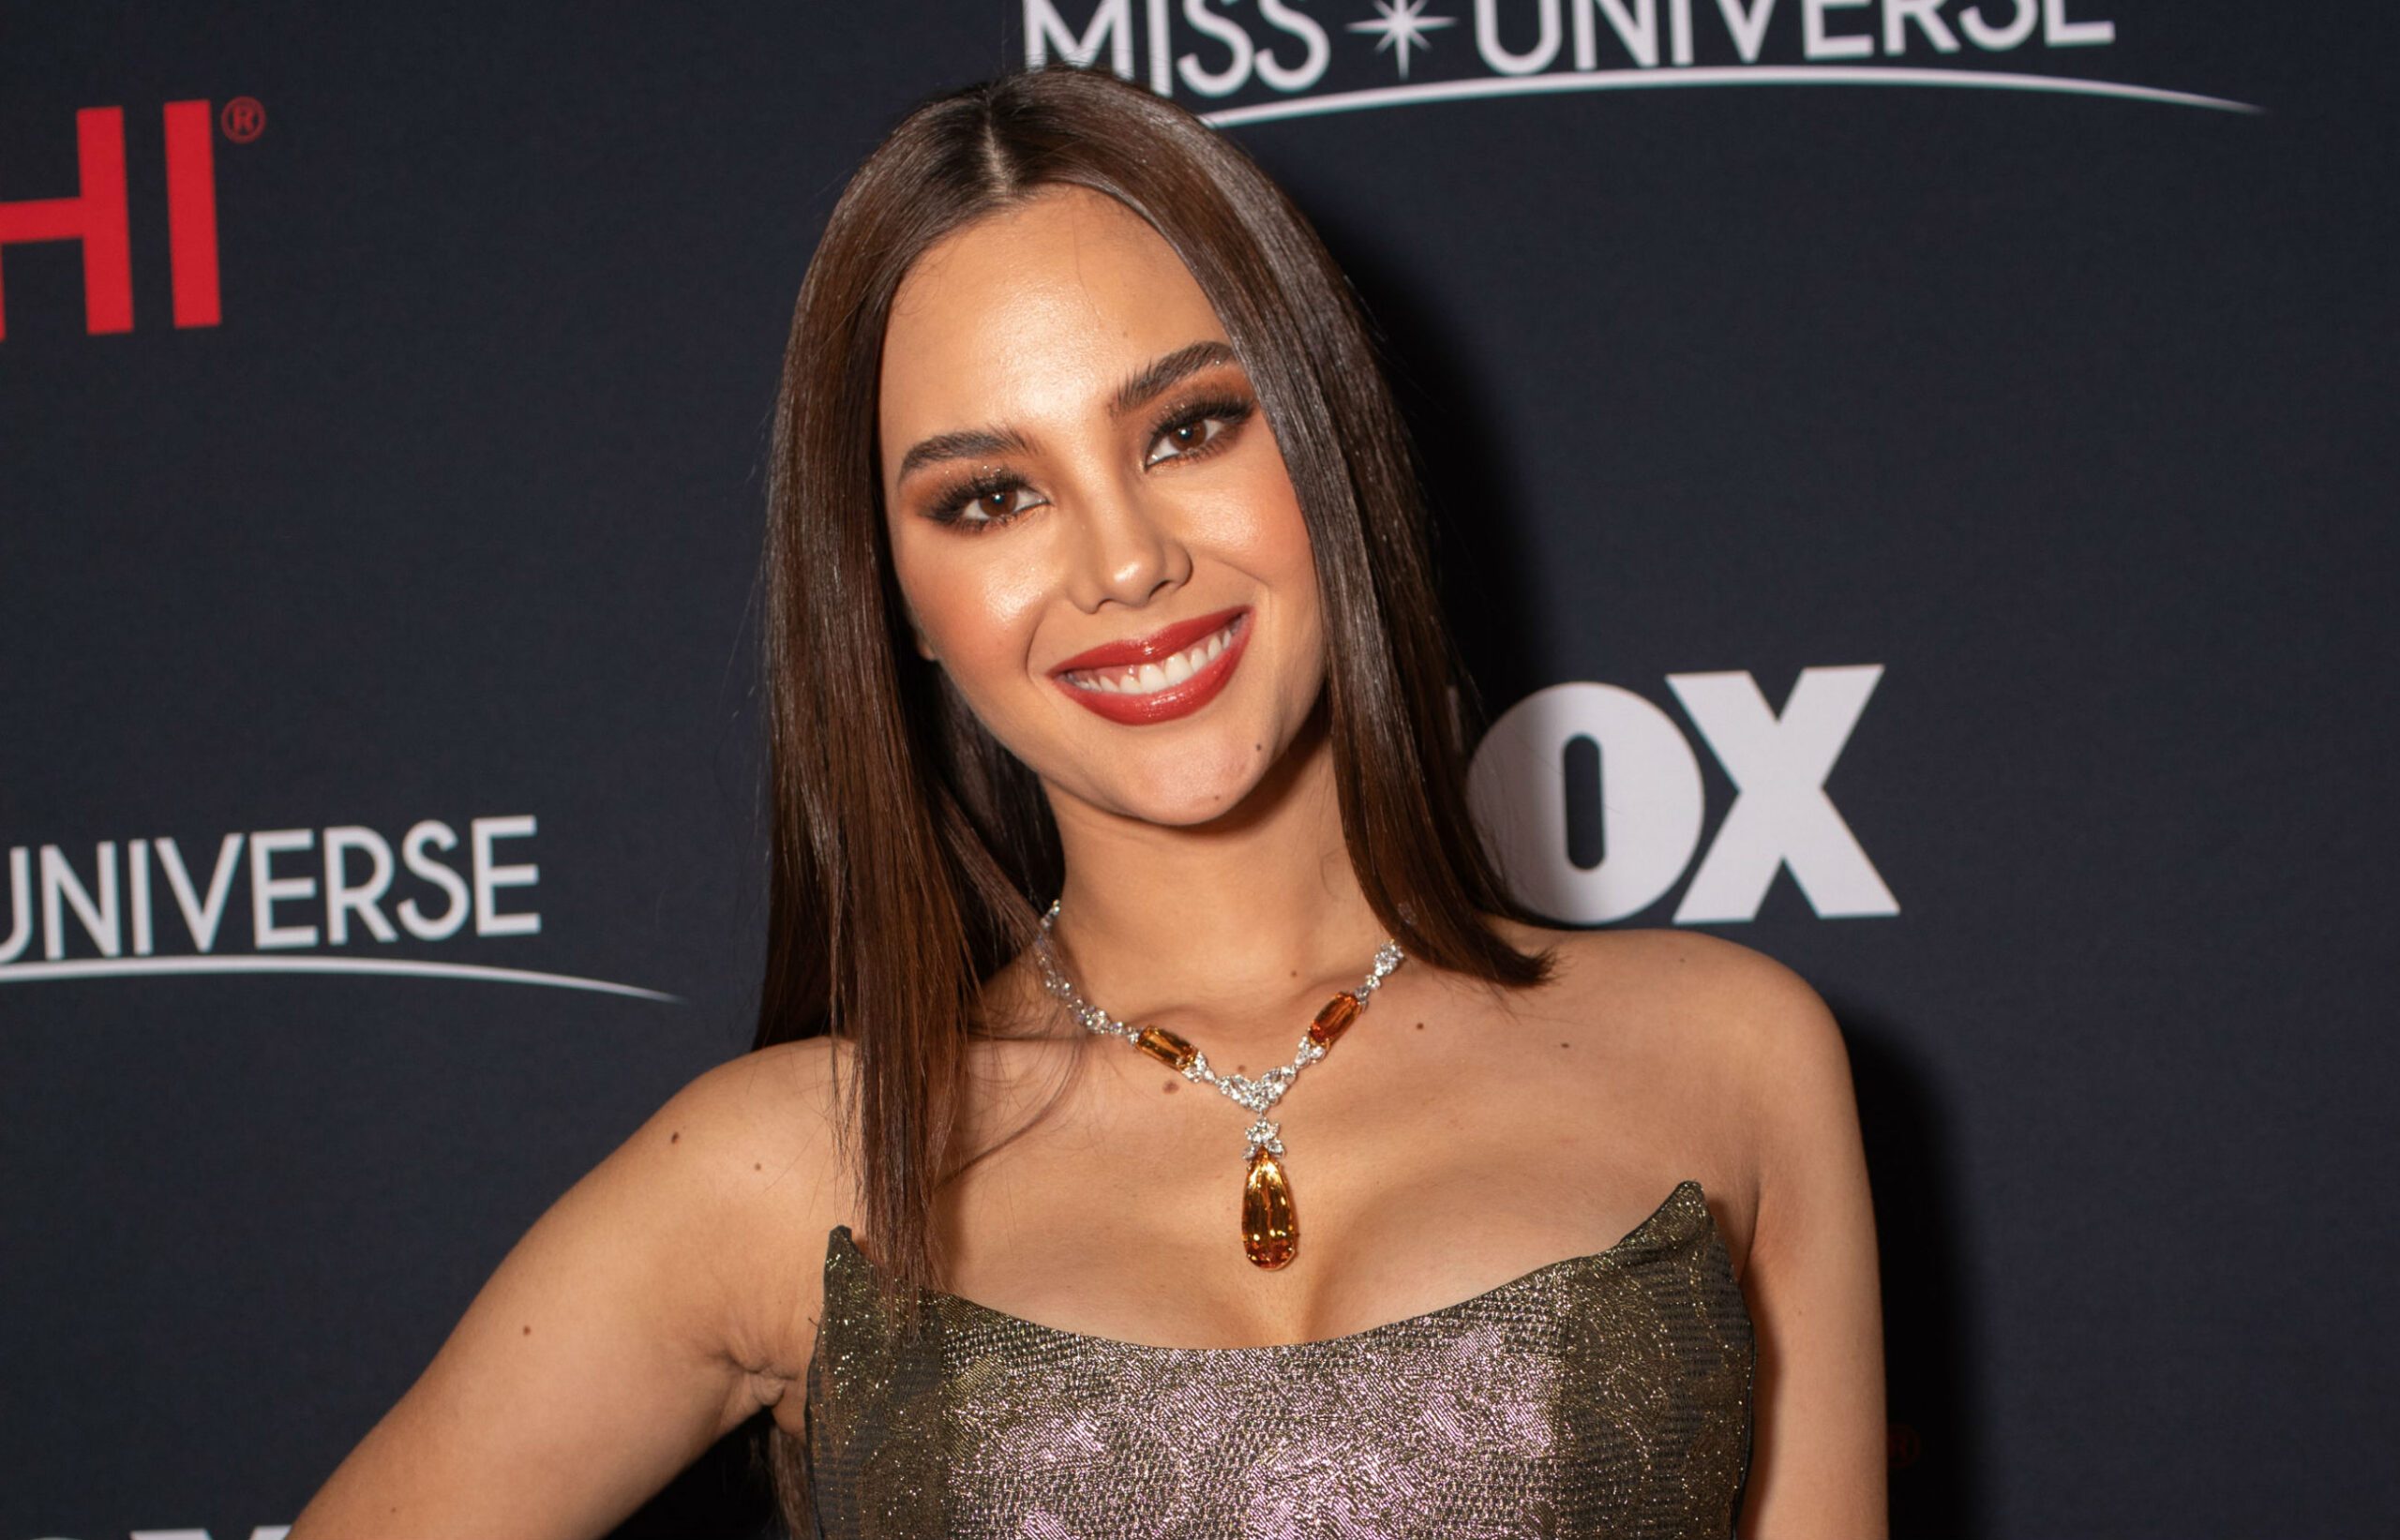 TRANSCRIPT: Catriona Gray’s final message as Miss Universe 2018